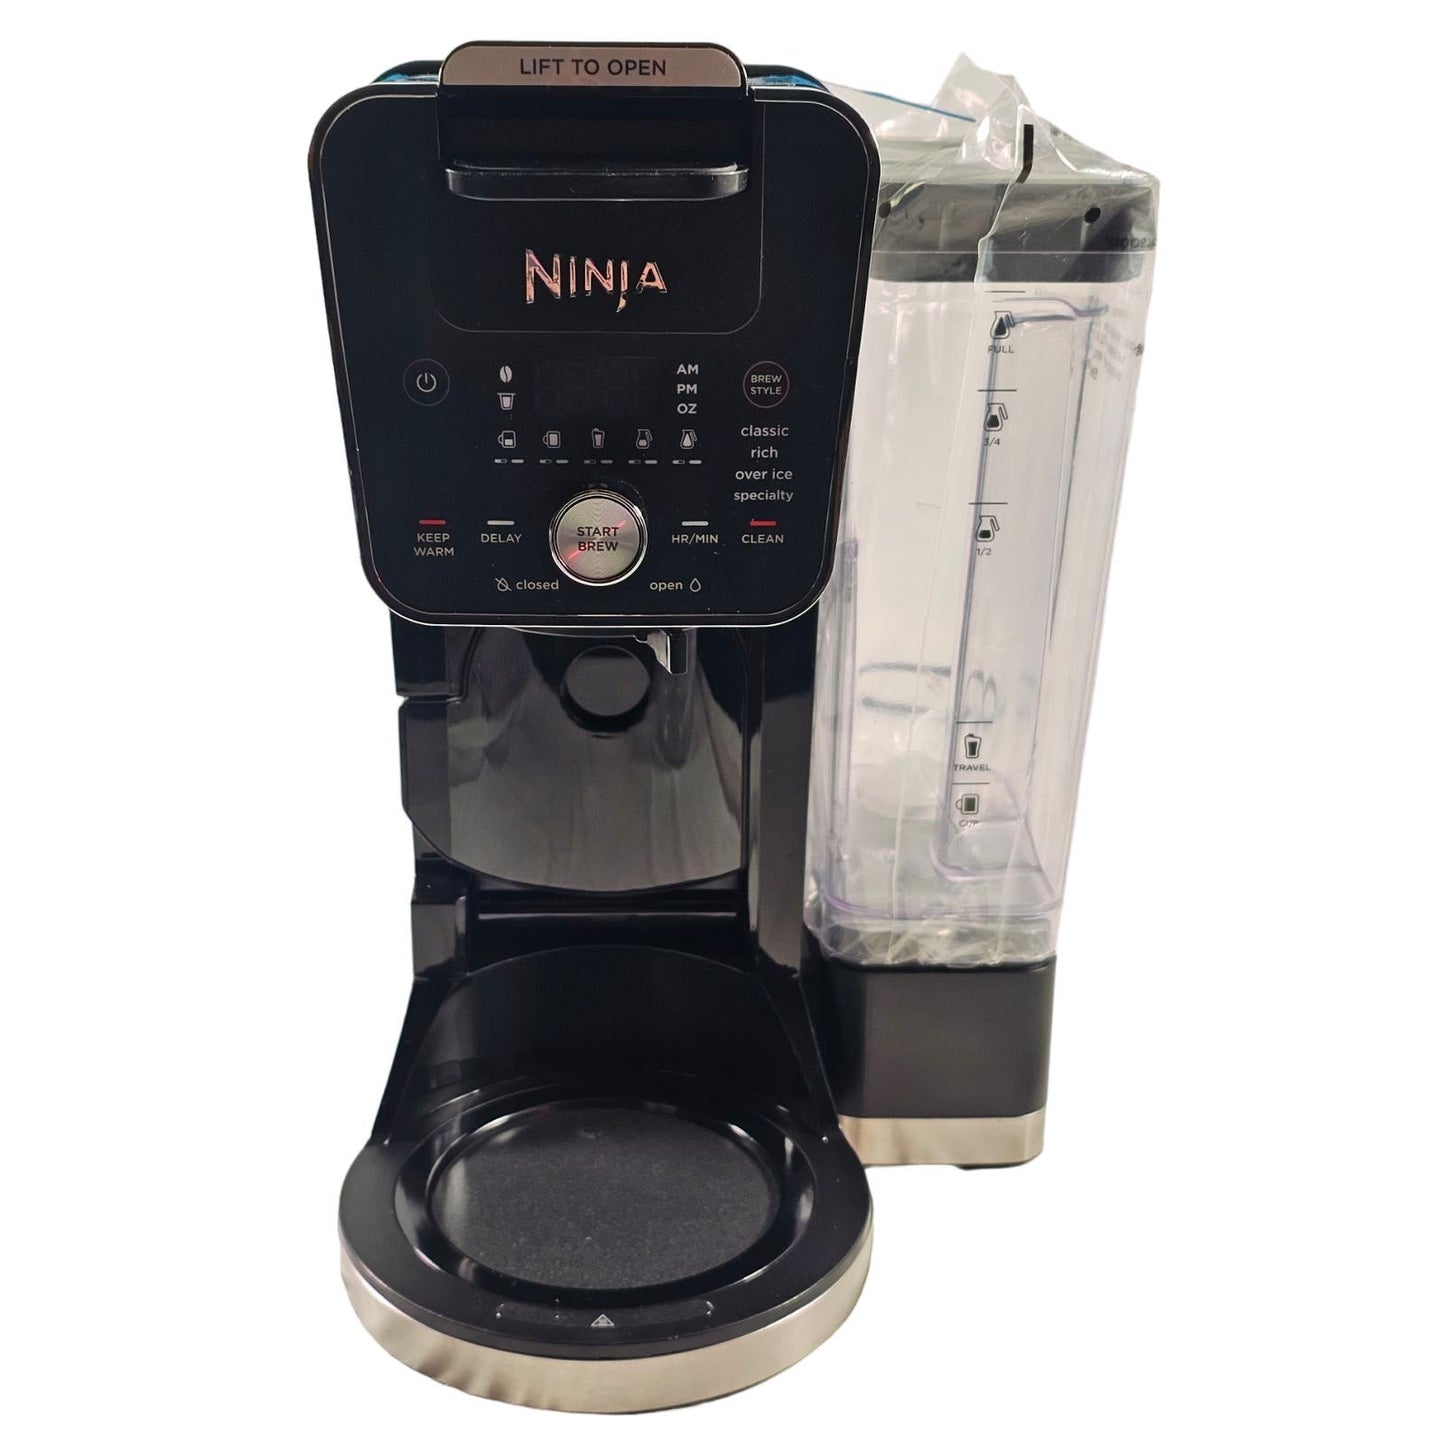 Ninja CFP451CO DualBrew System 14-Cup Coffee Maker, Single-Serve Pods & Grounds, 4 Brew Styles, Built-In Fold Away Frother, Permenant Filter